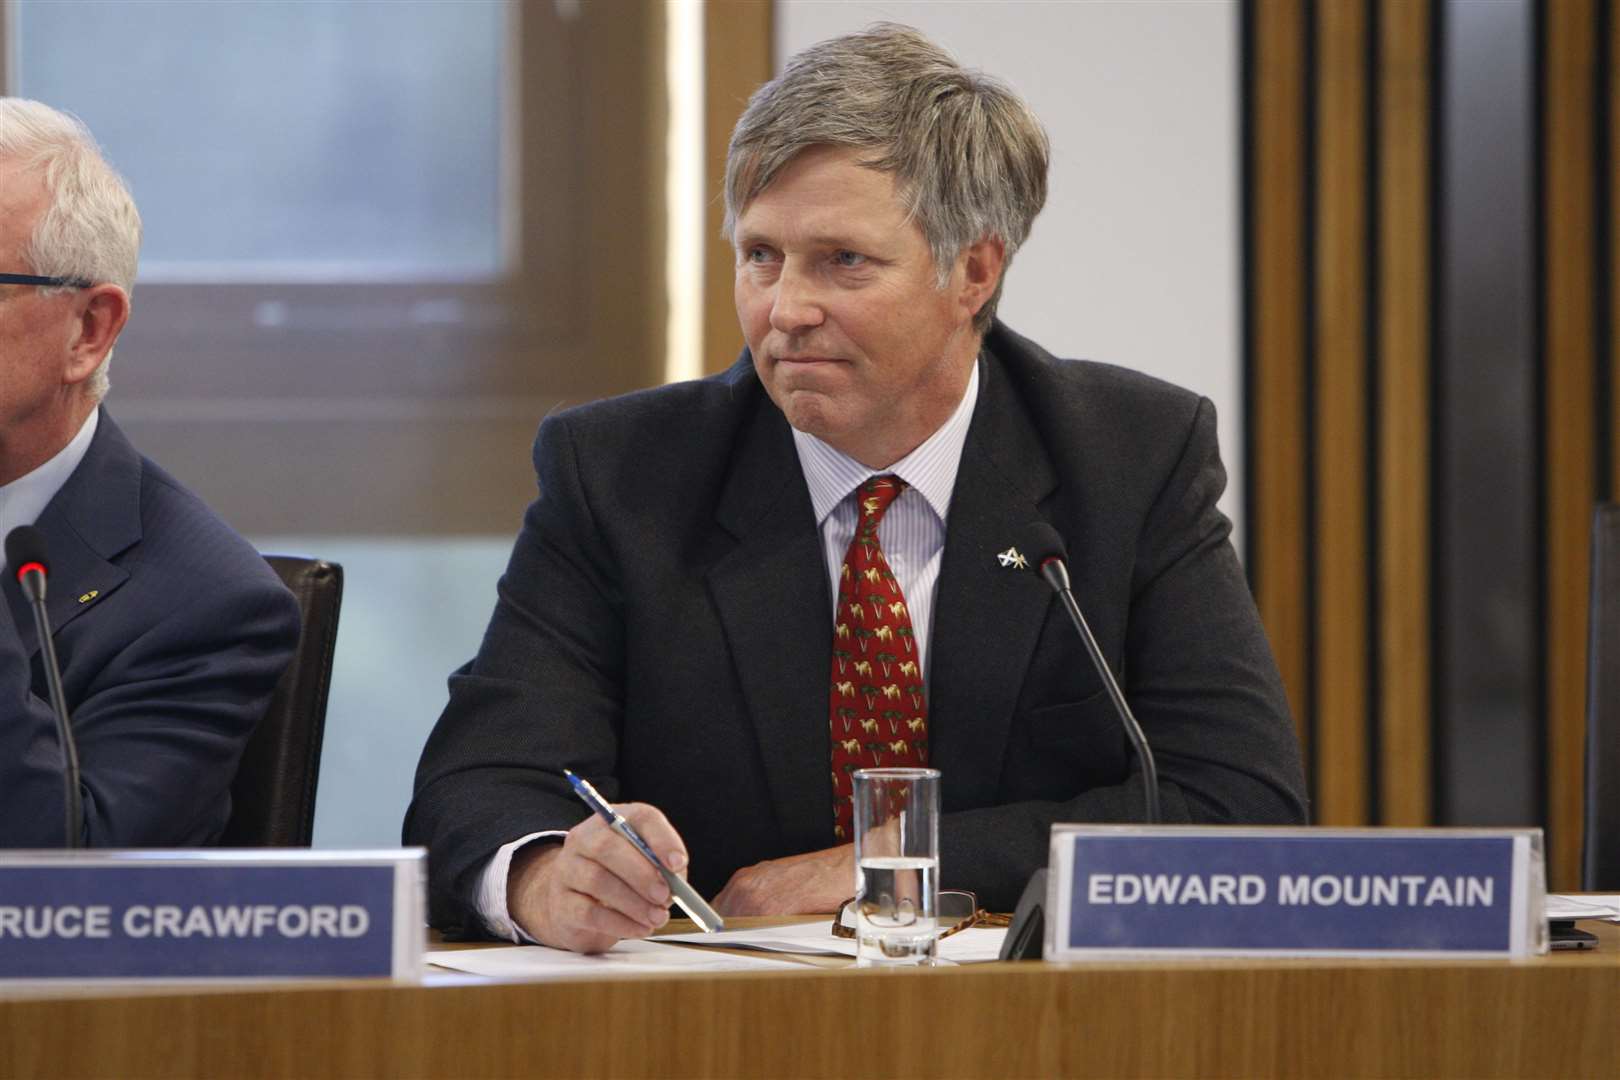 Edward Mountain is convener of the Scottish Parliament's rural economy and connectivity committee. Picture: Andrew Cowan / Scottish Parliament